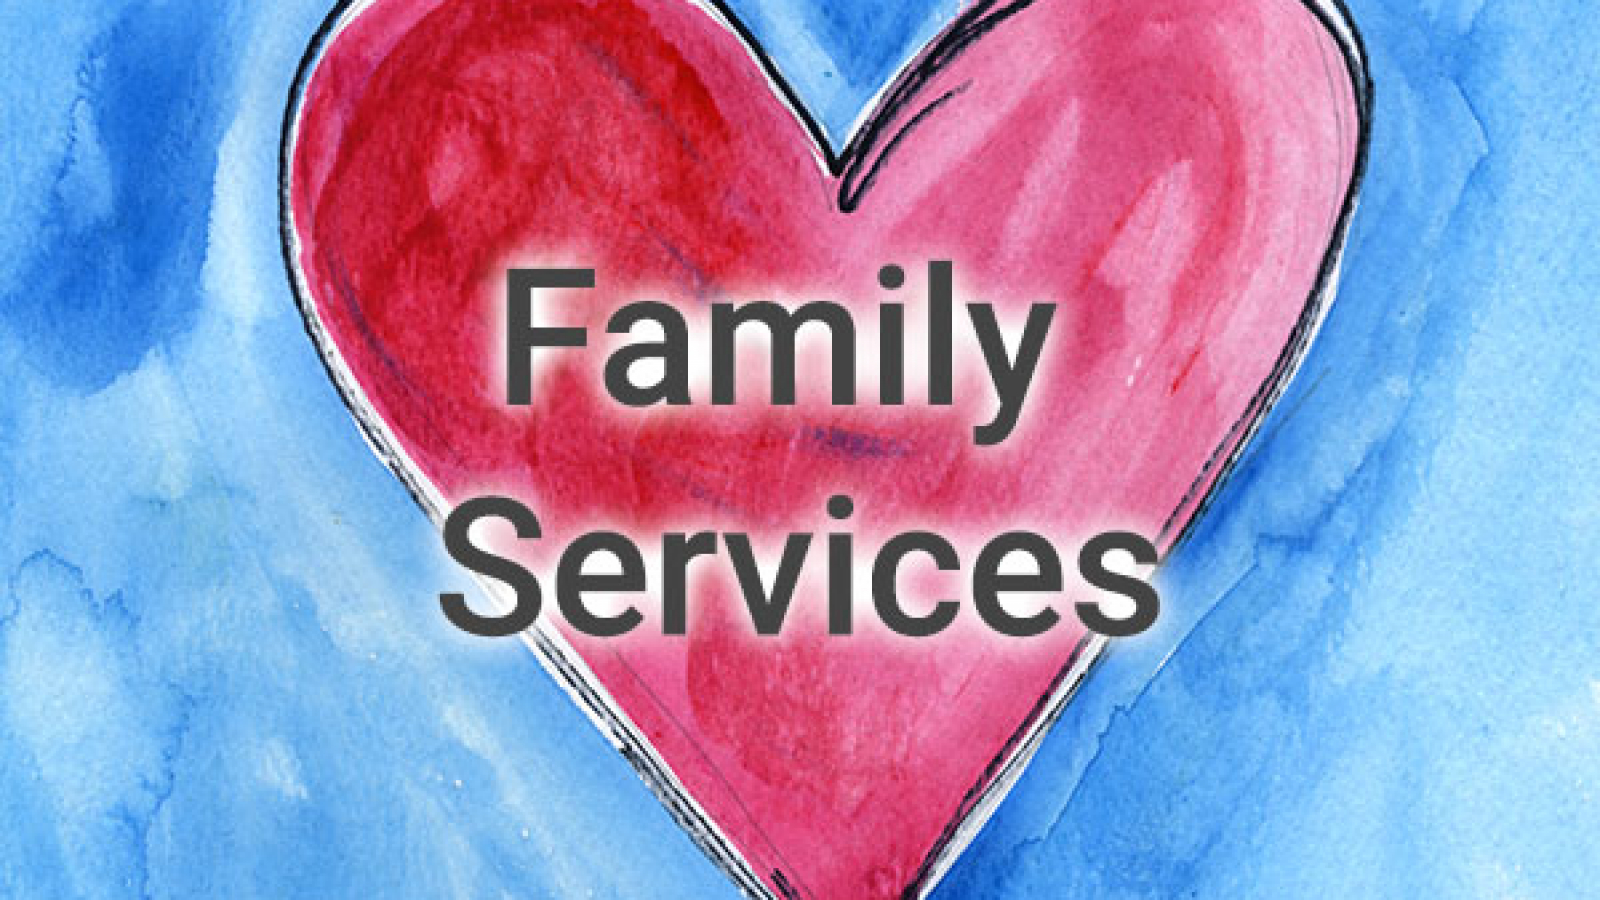 FamilyServices